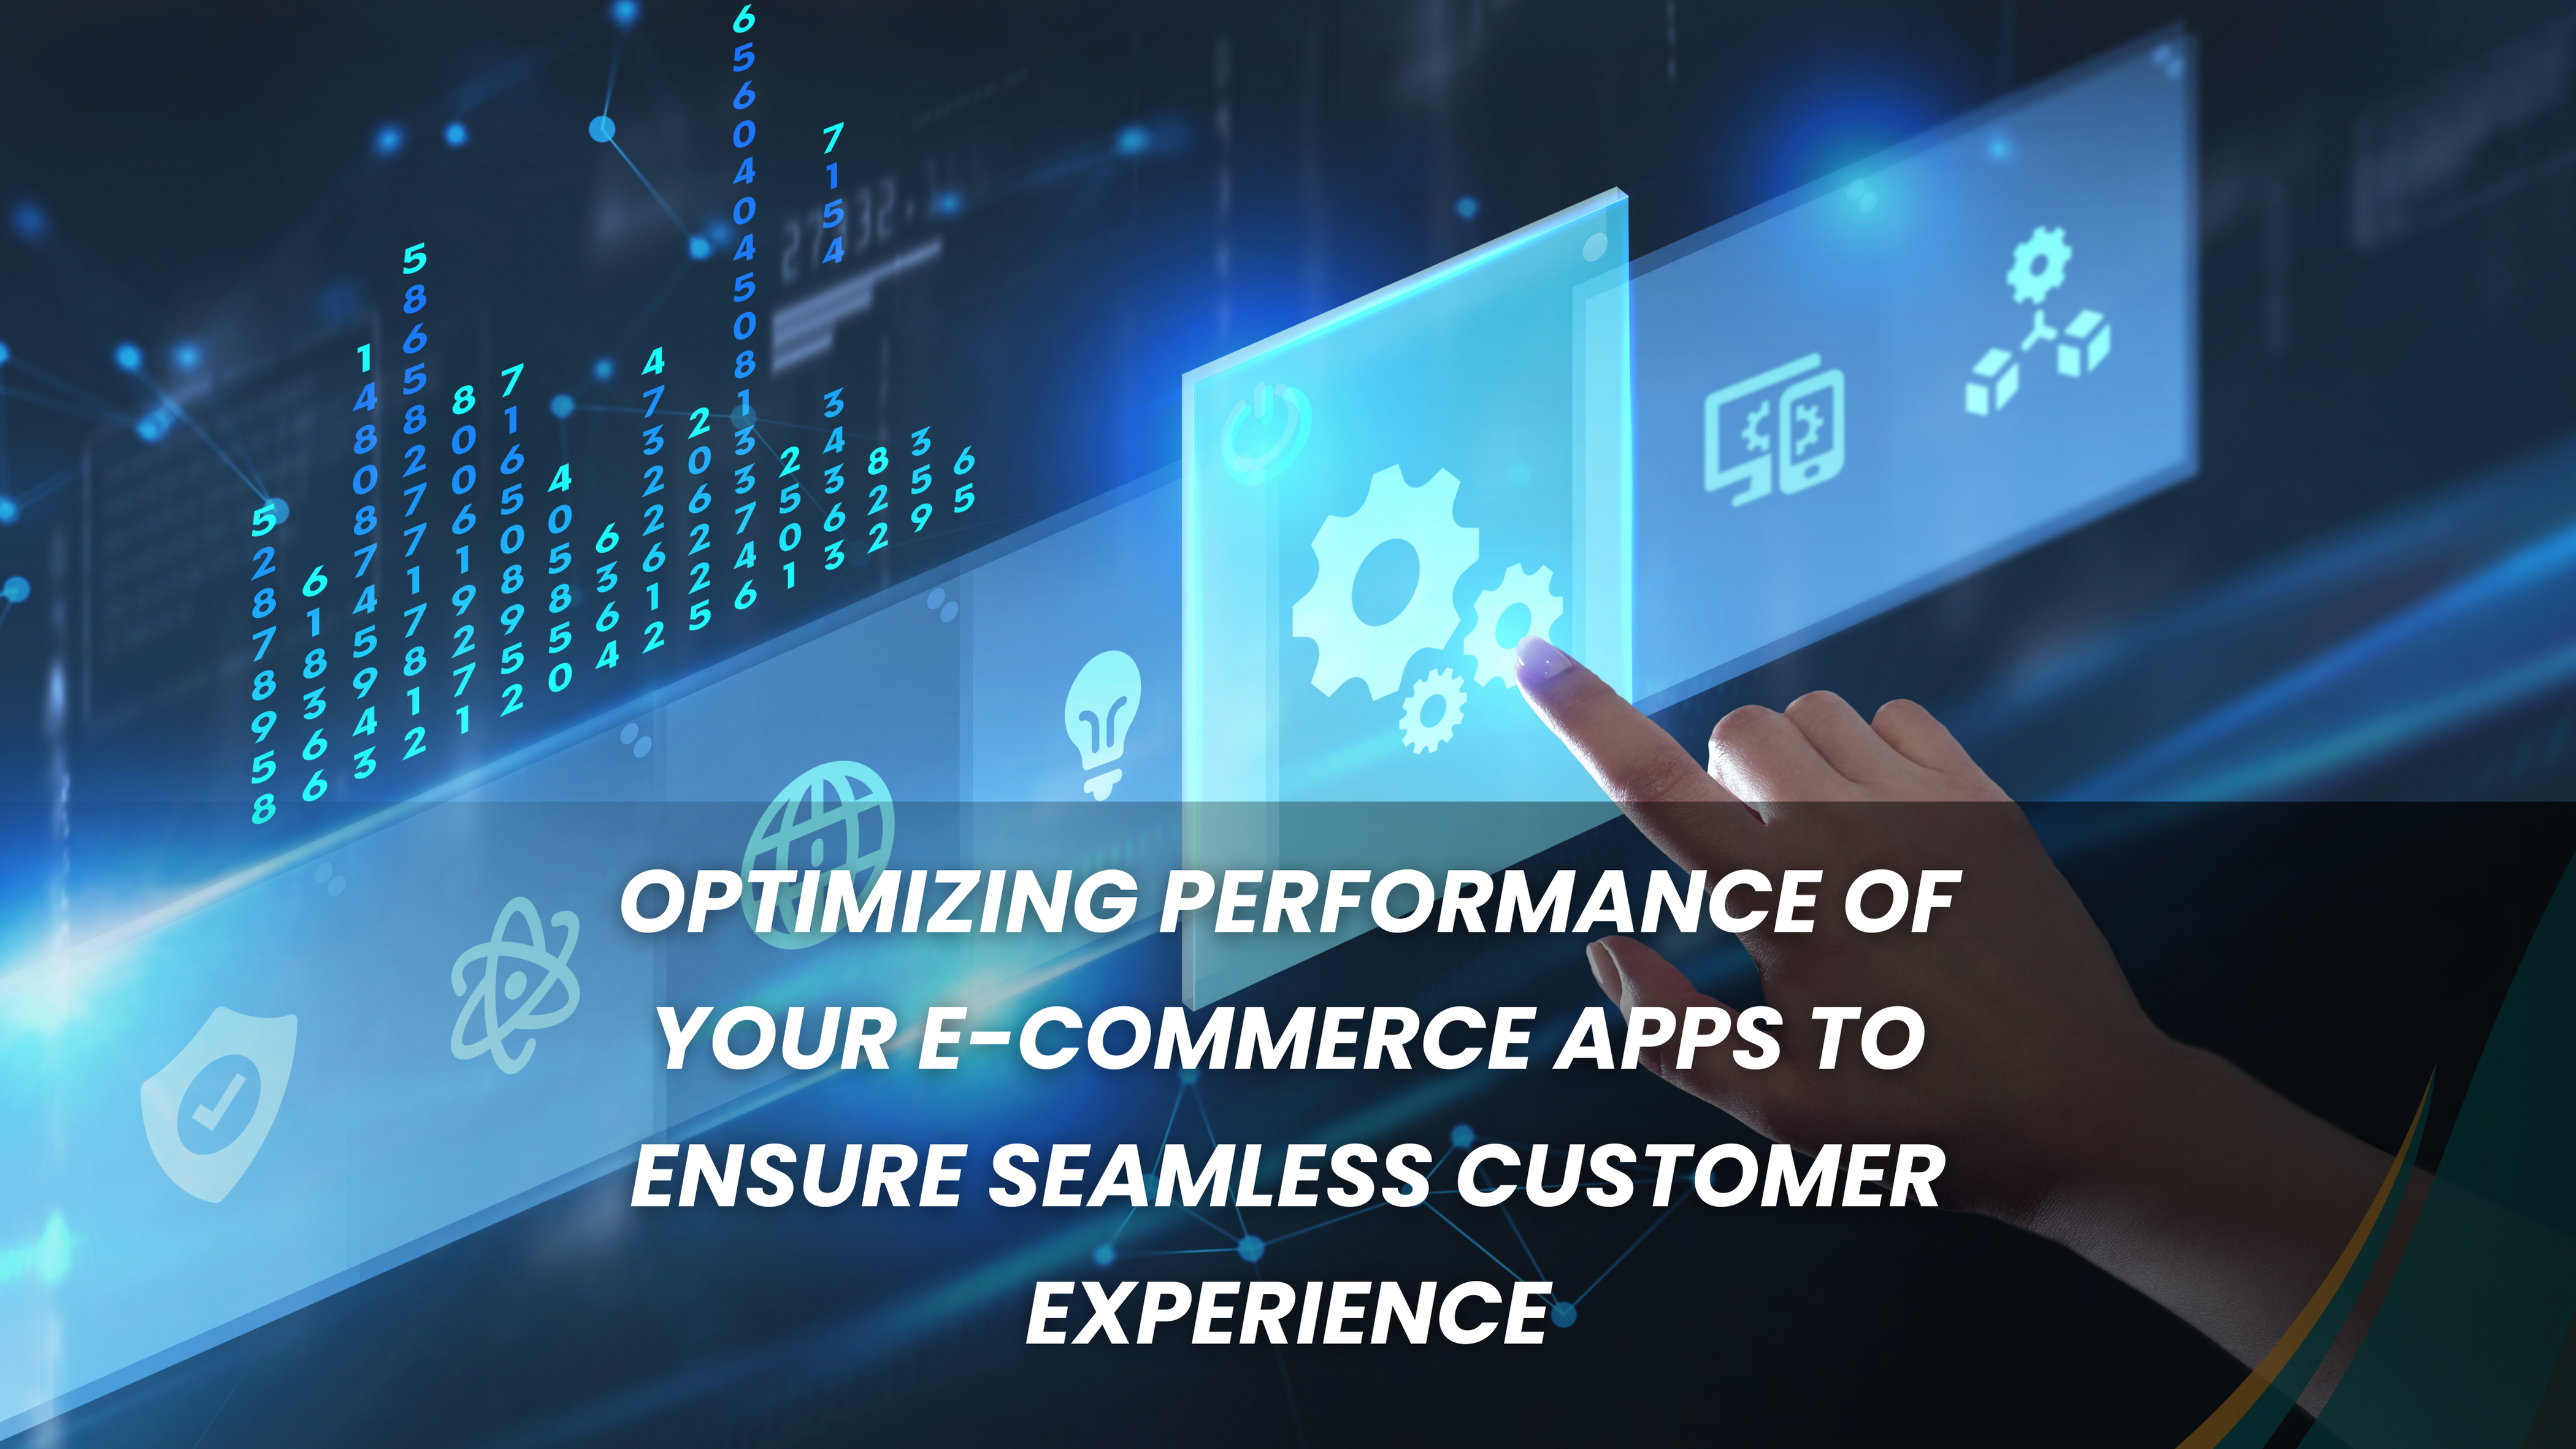 Optimizing performance of your E-commerce apps to ensure seamless customer experience